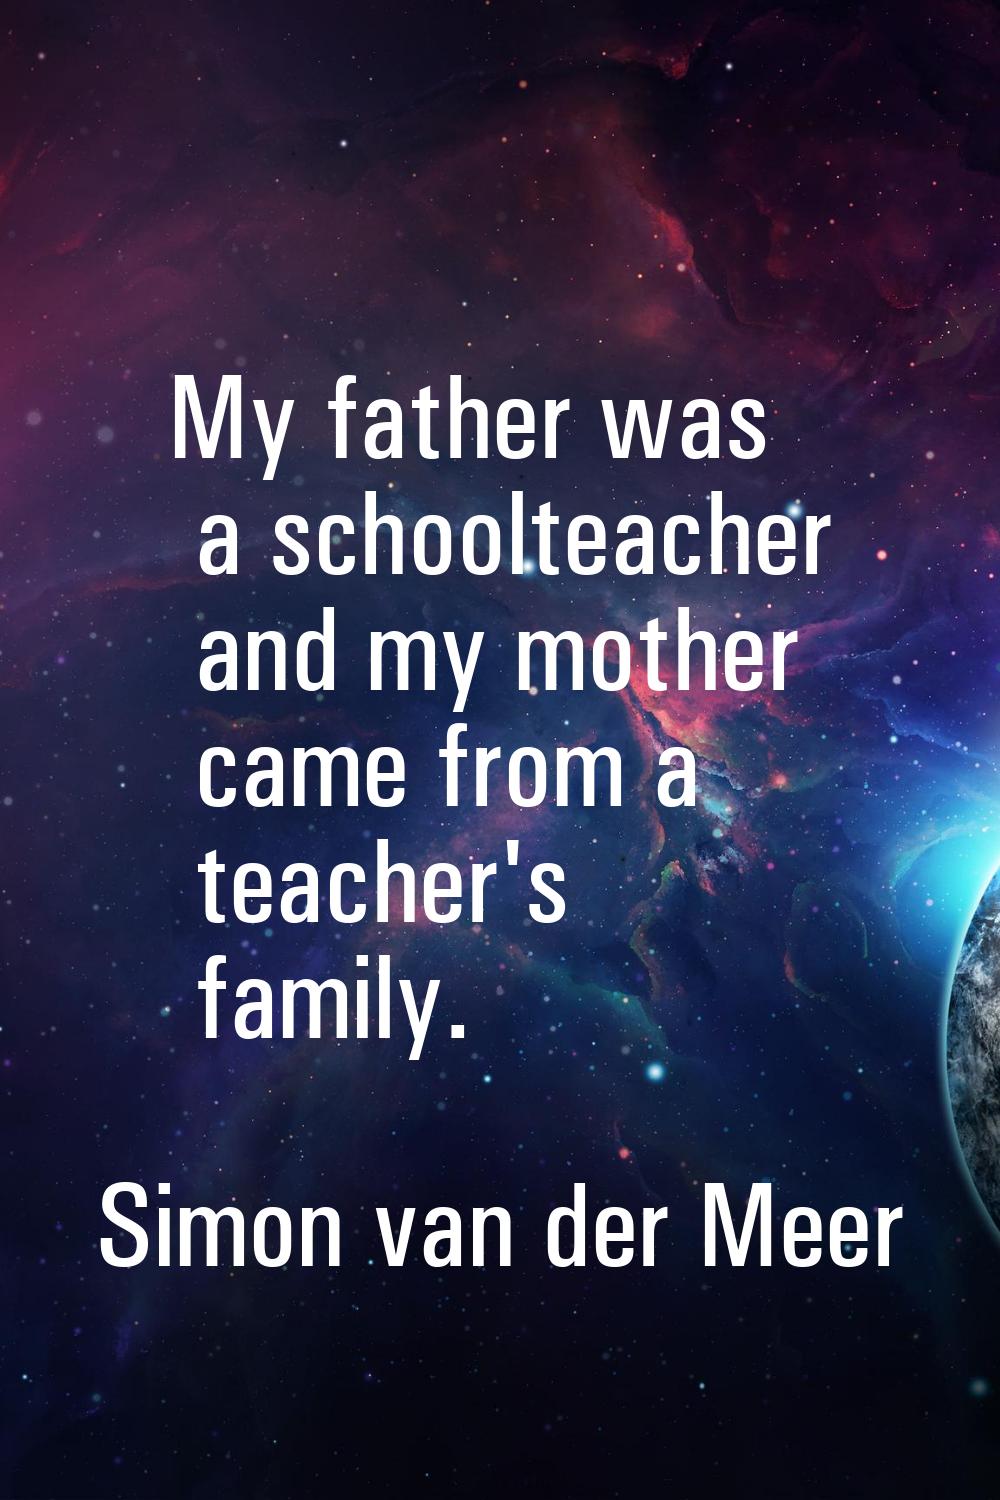 My father was a schoolteacher and my mother came from a teacher's family.